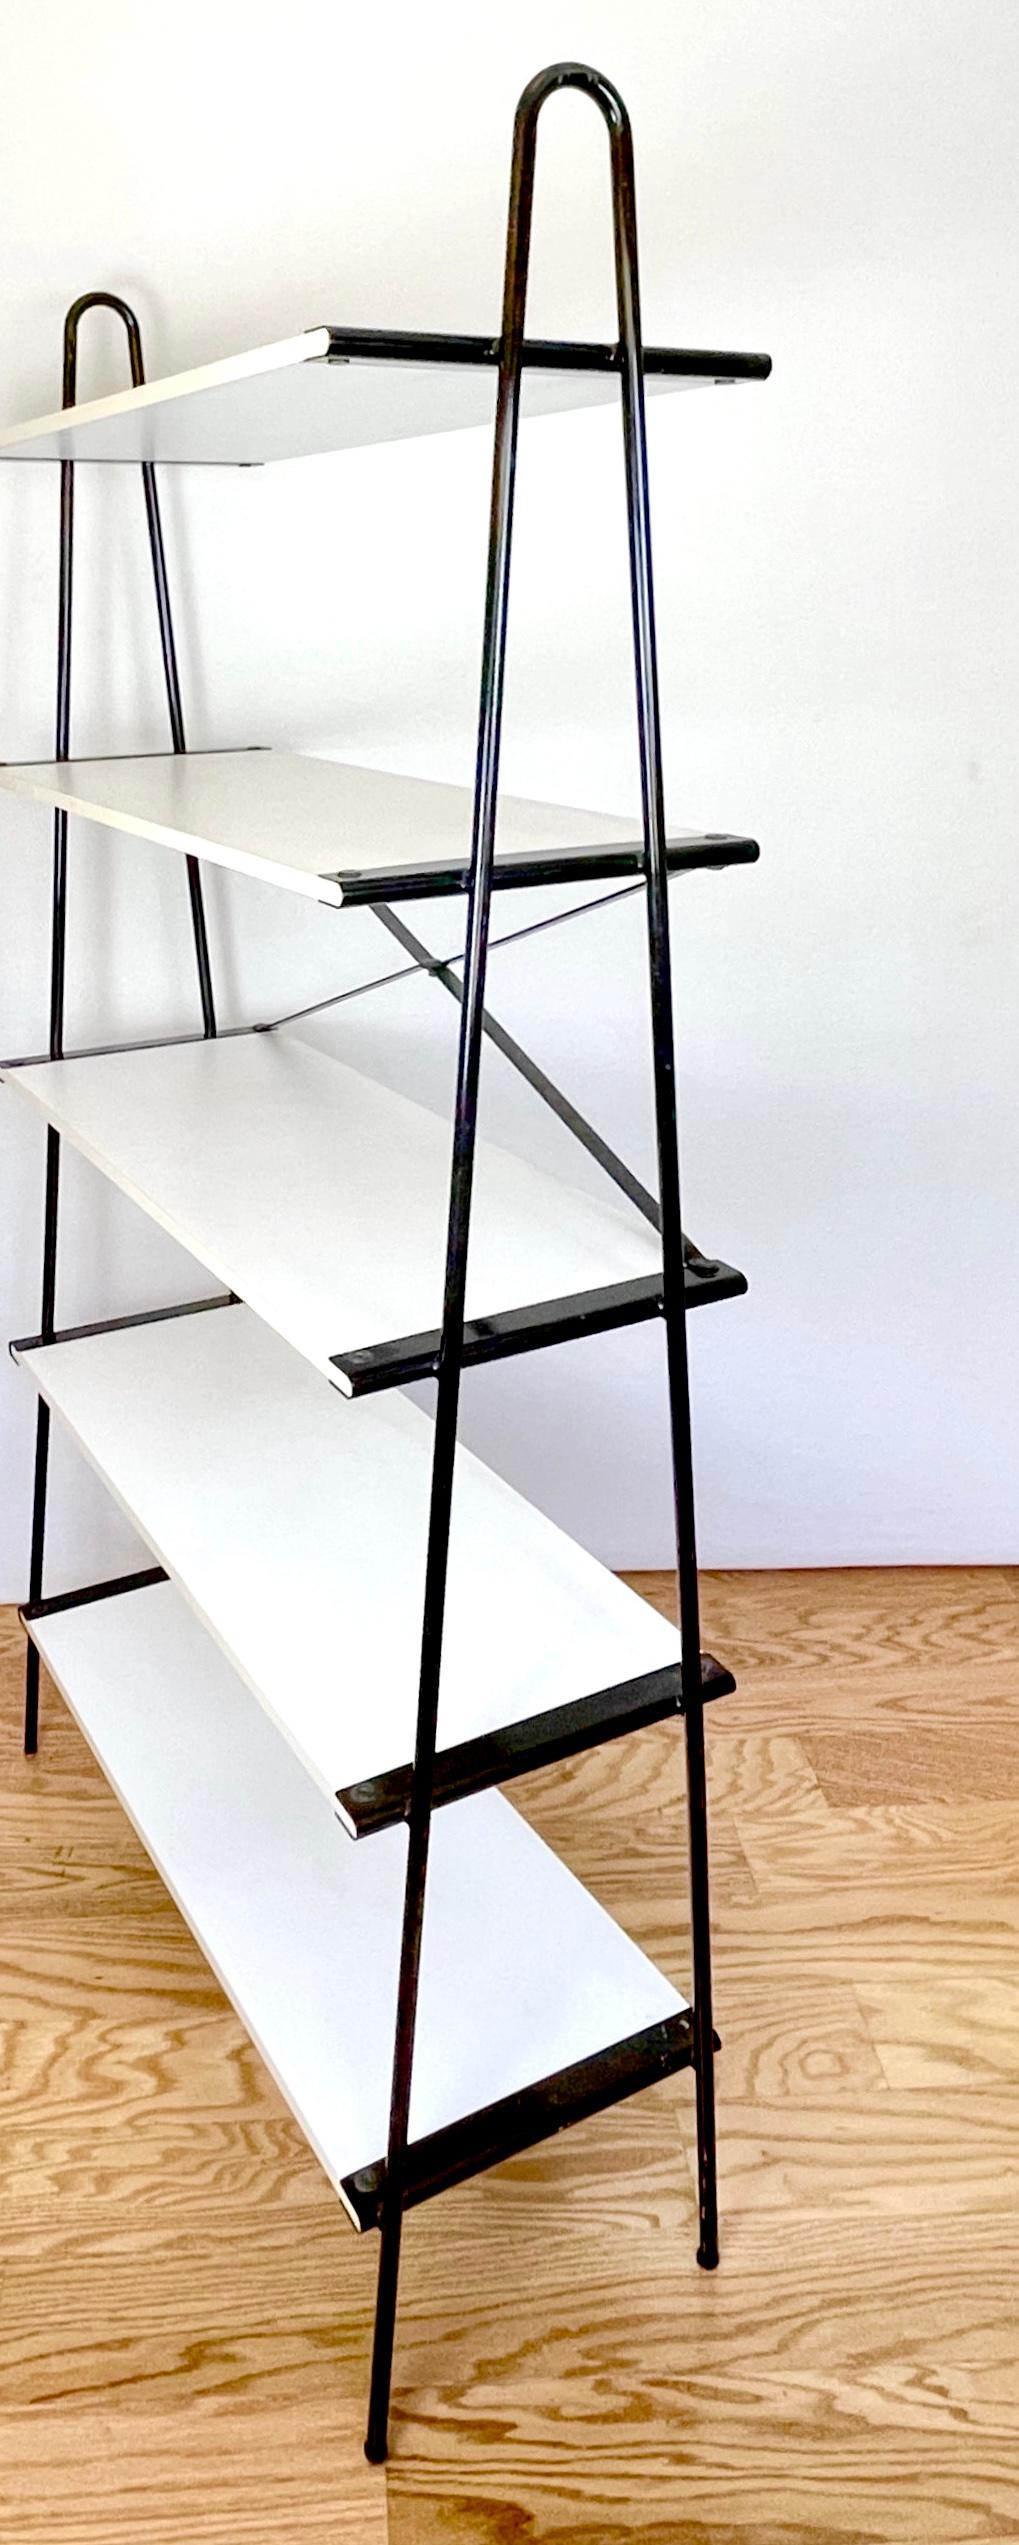 Italian Post-Modern Architectural Bookcase, Ladder Shelving Unit Etagere For Sale 11